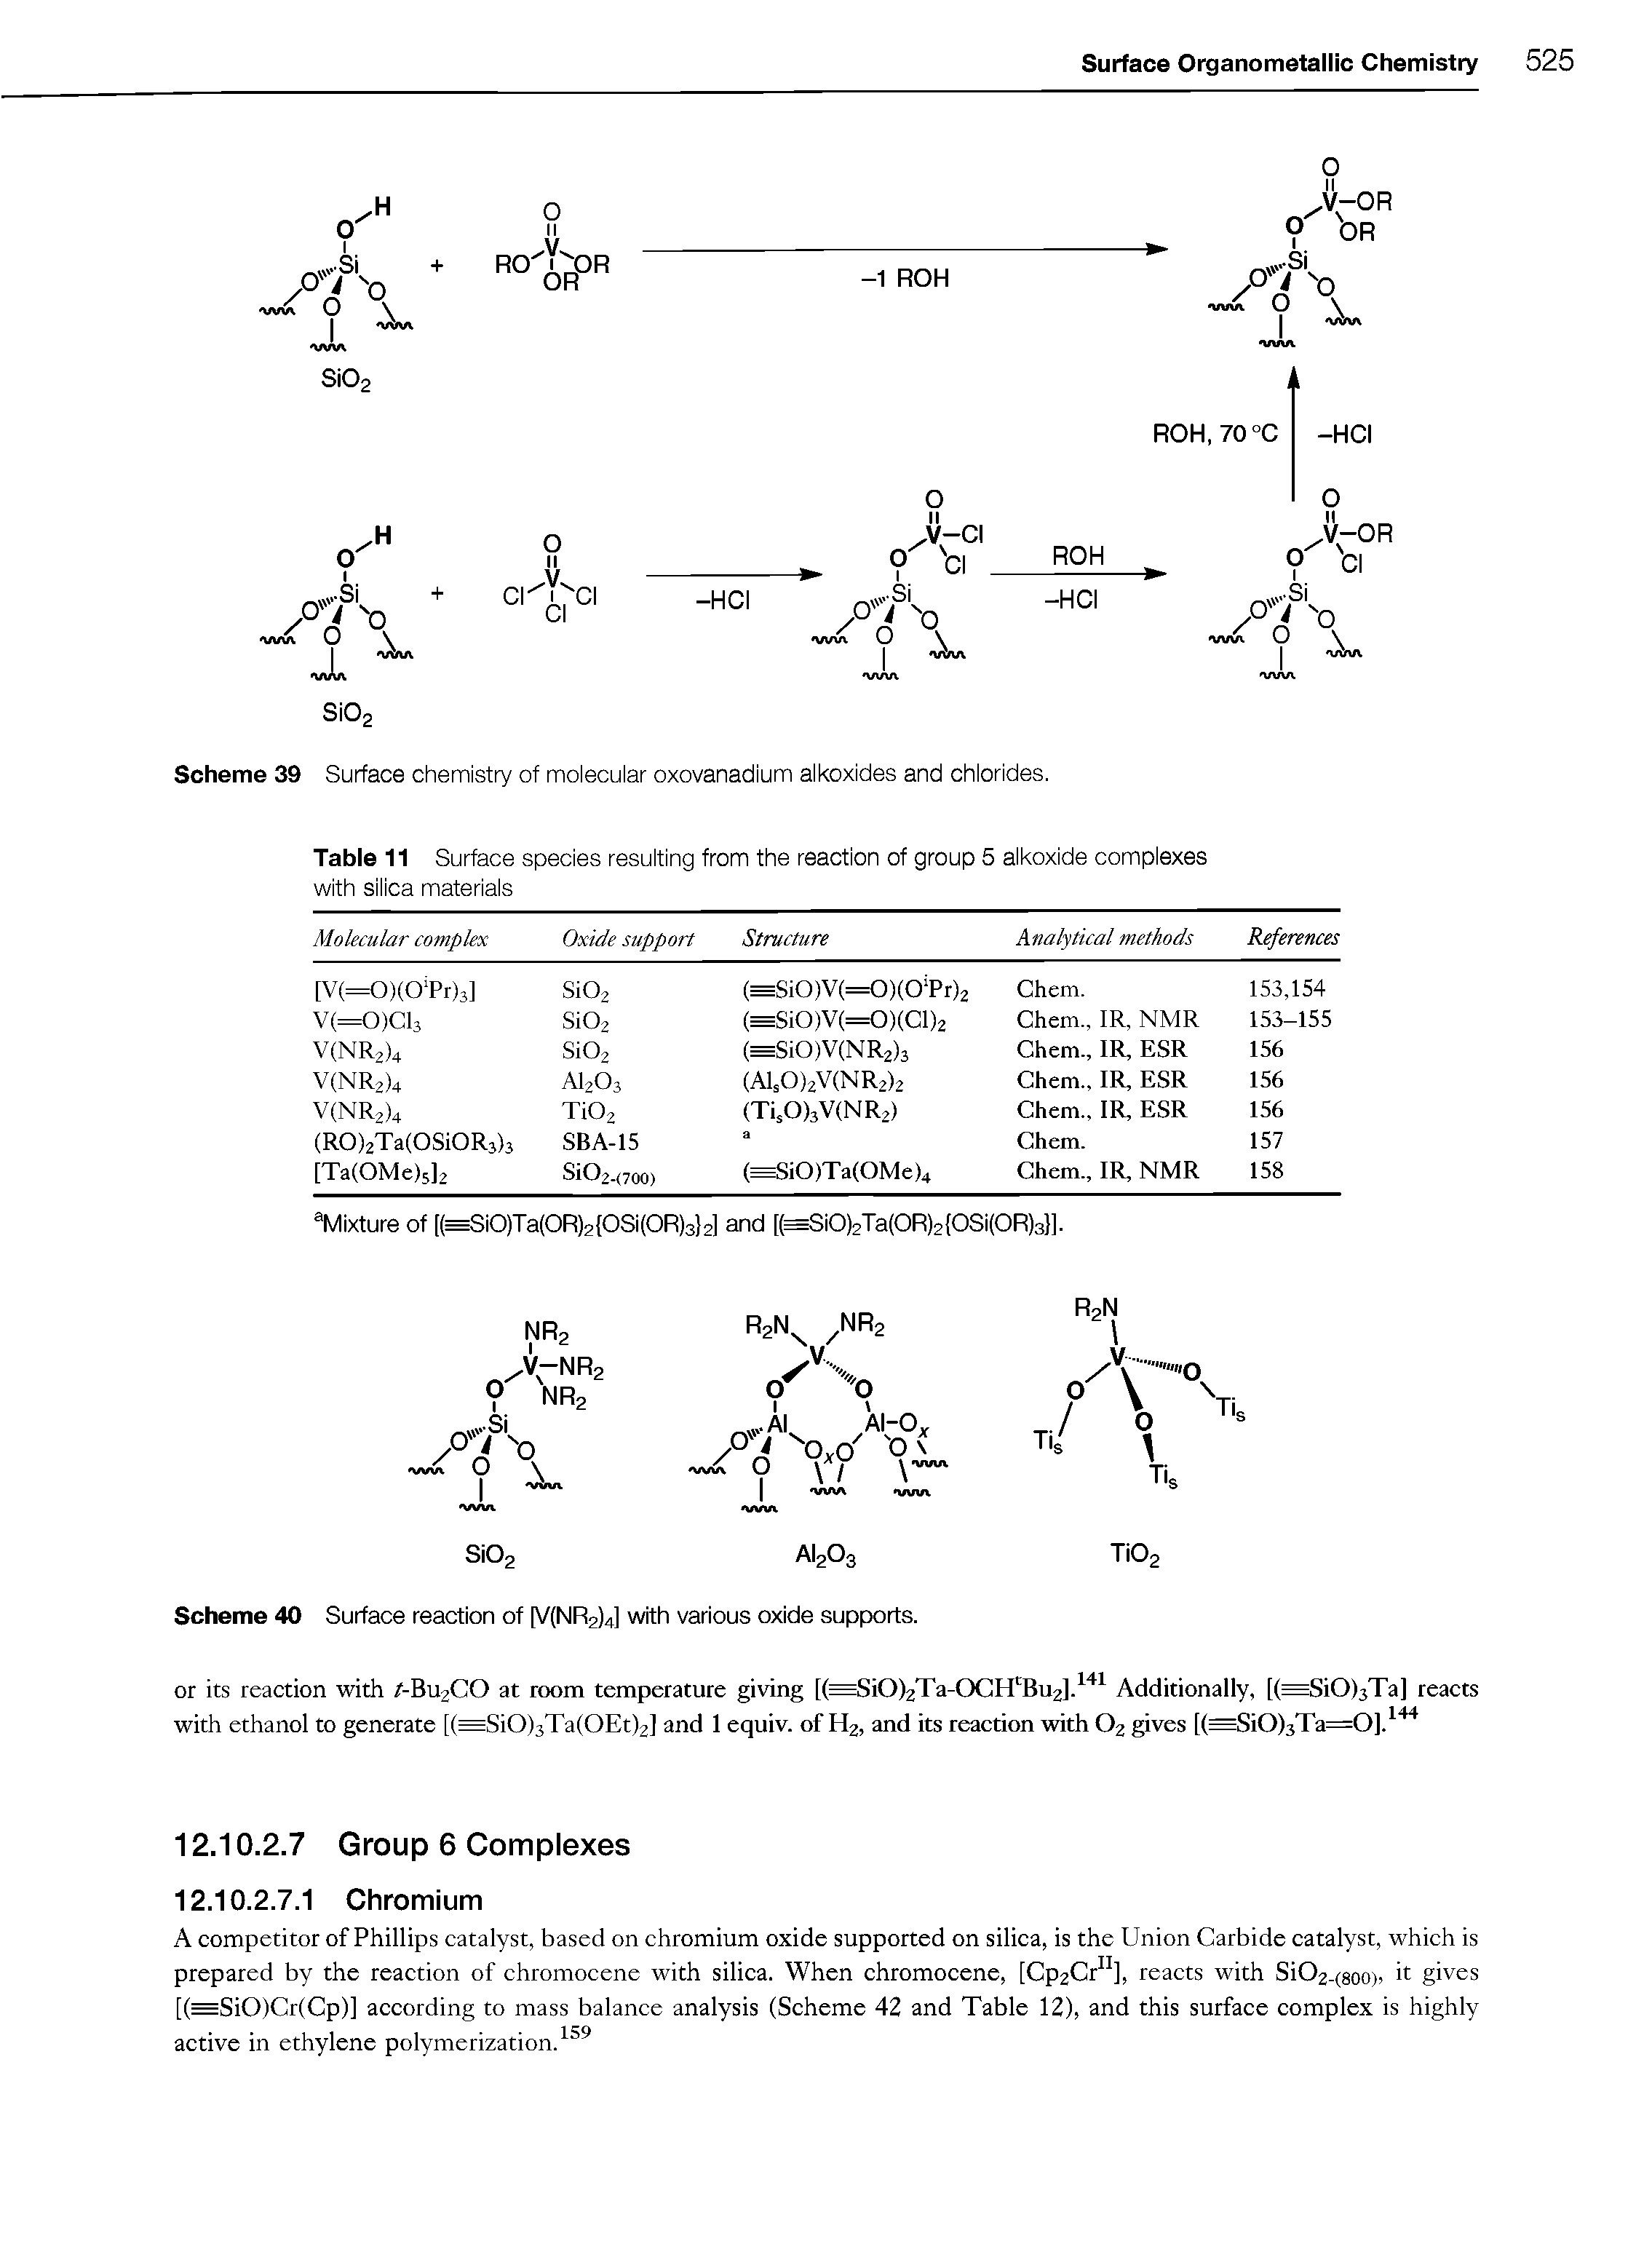 Scheme 39 Surface chemistry of molecular oxovanadium alkoxides and chlorides.